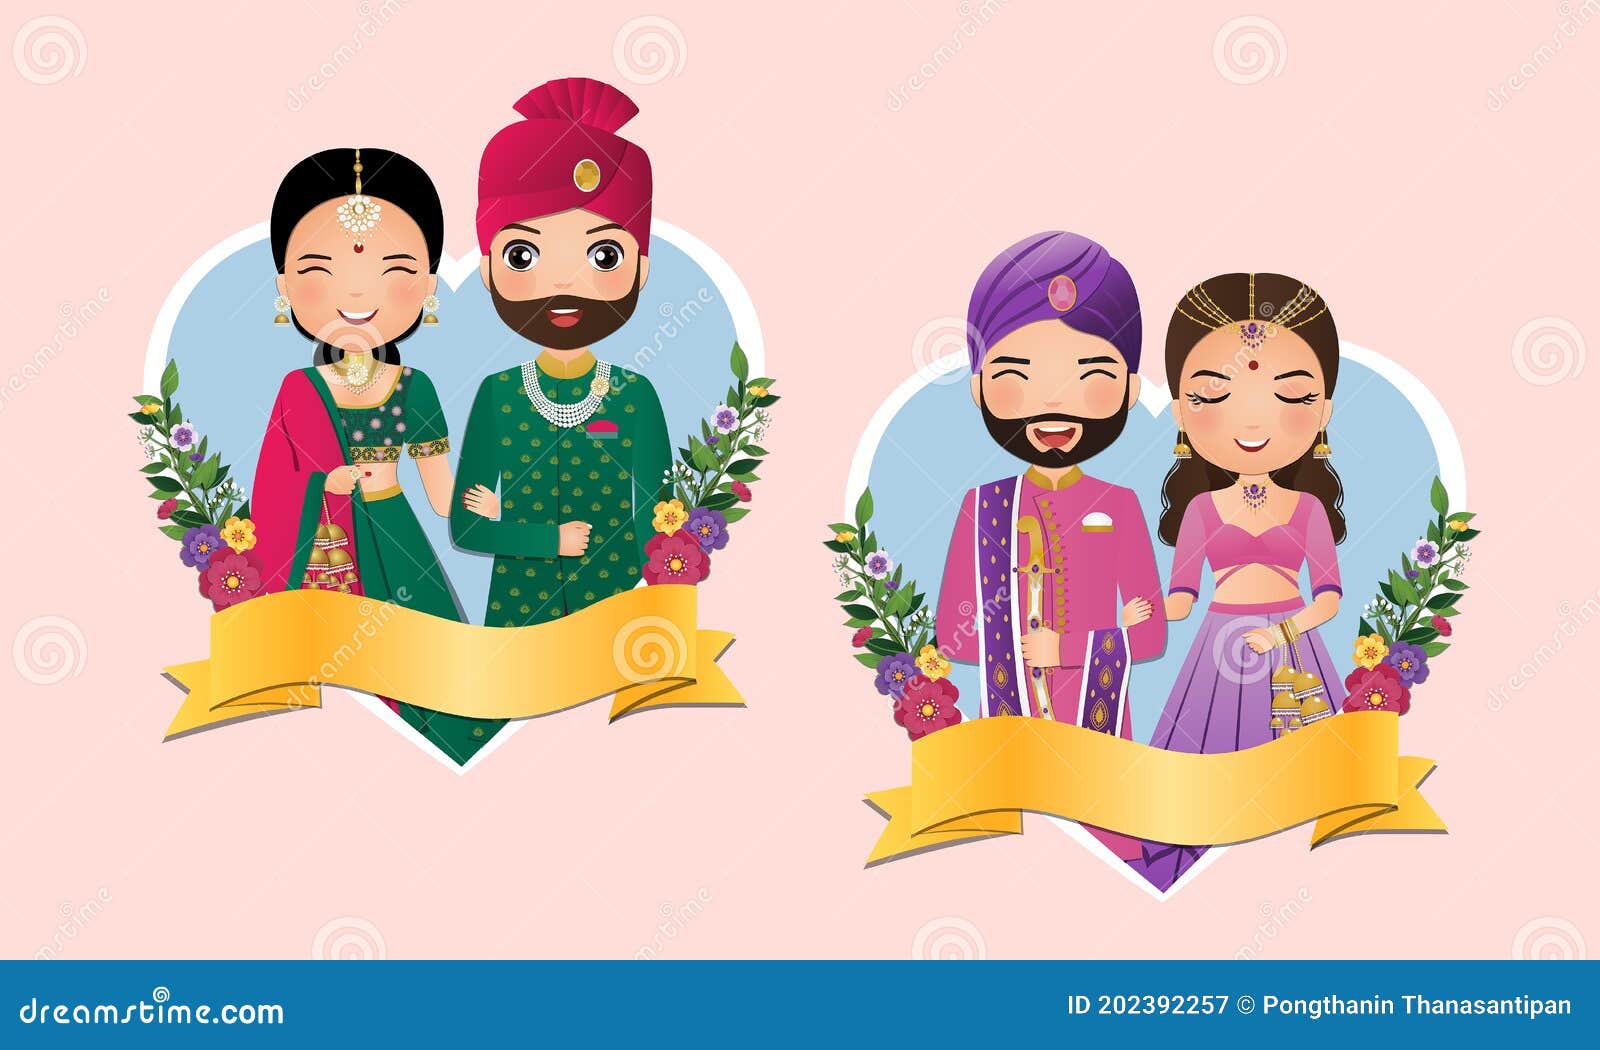 Wedding Invitation Card the Bride and Groom Cute Couple in Traditional  Indian Dress Cartoon Character Stock Vector - Illustration of design,  invitation: 202392257